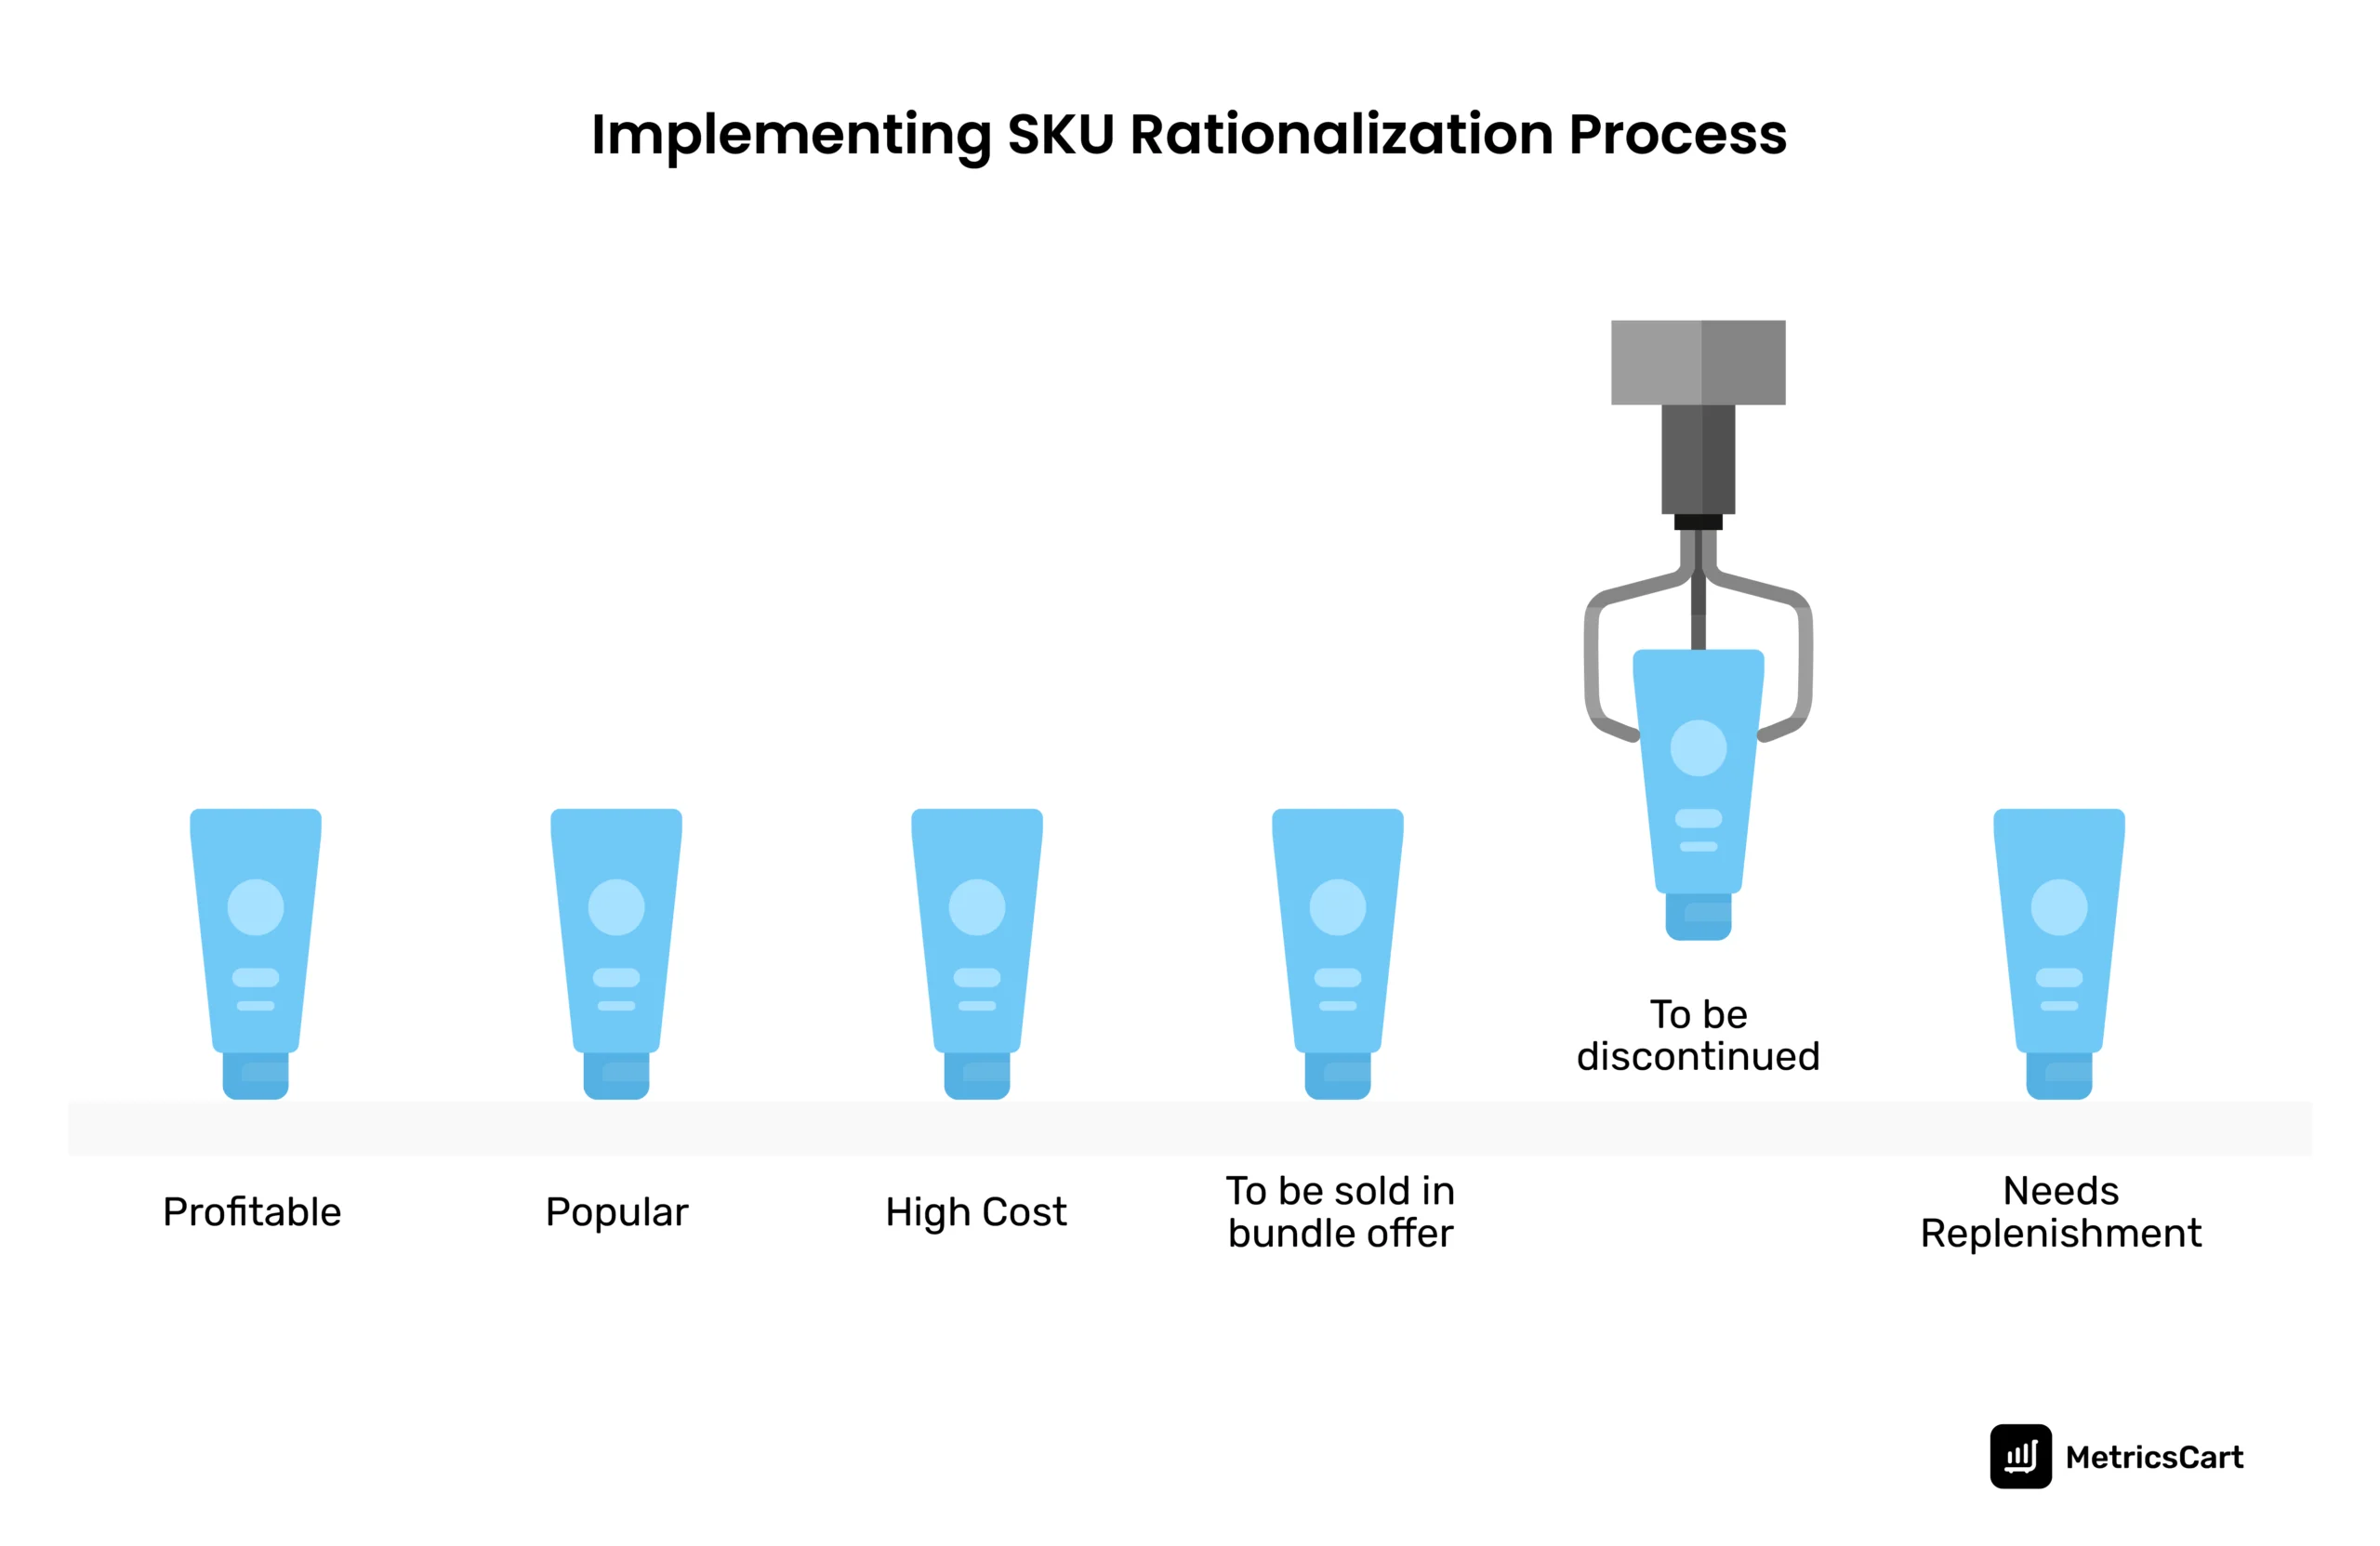 the image shows implementation of SKU rationalization